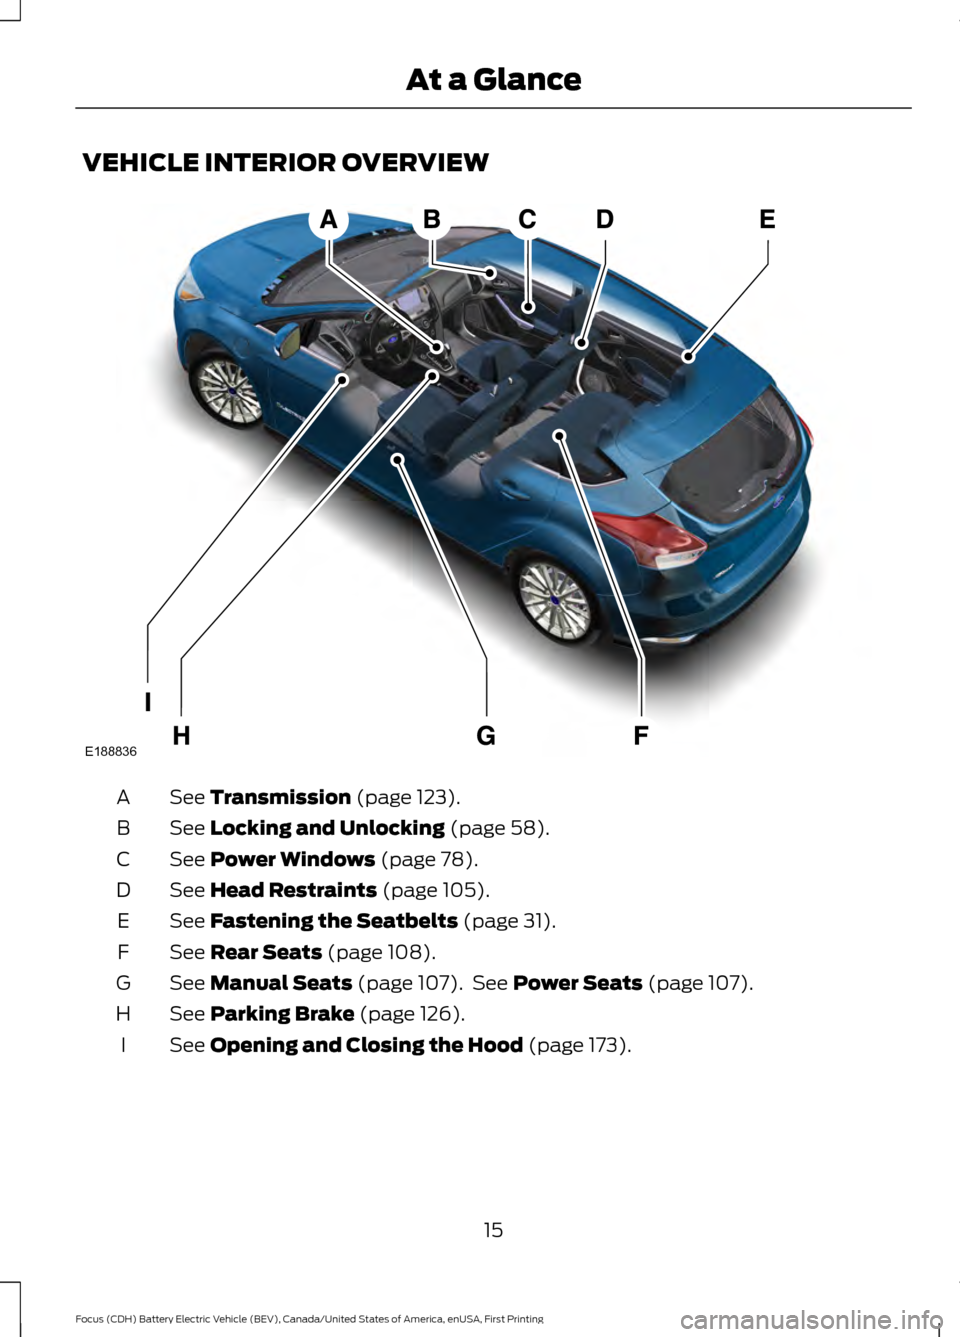 FORD FOCUS ELECTRIC 2016 3.G Owners Manual VEHICLE INTERIOR OVERVIEW
See Transmission (page 123).
A
See 
Locking and Unlocking (page 58).
B
See 
Power Windows (page 78).
C
See 
Head Restraints (page 105).
D
See 
Fastening the Seatbelts (page 3